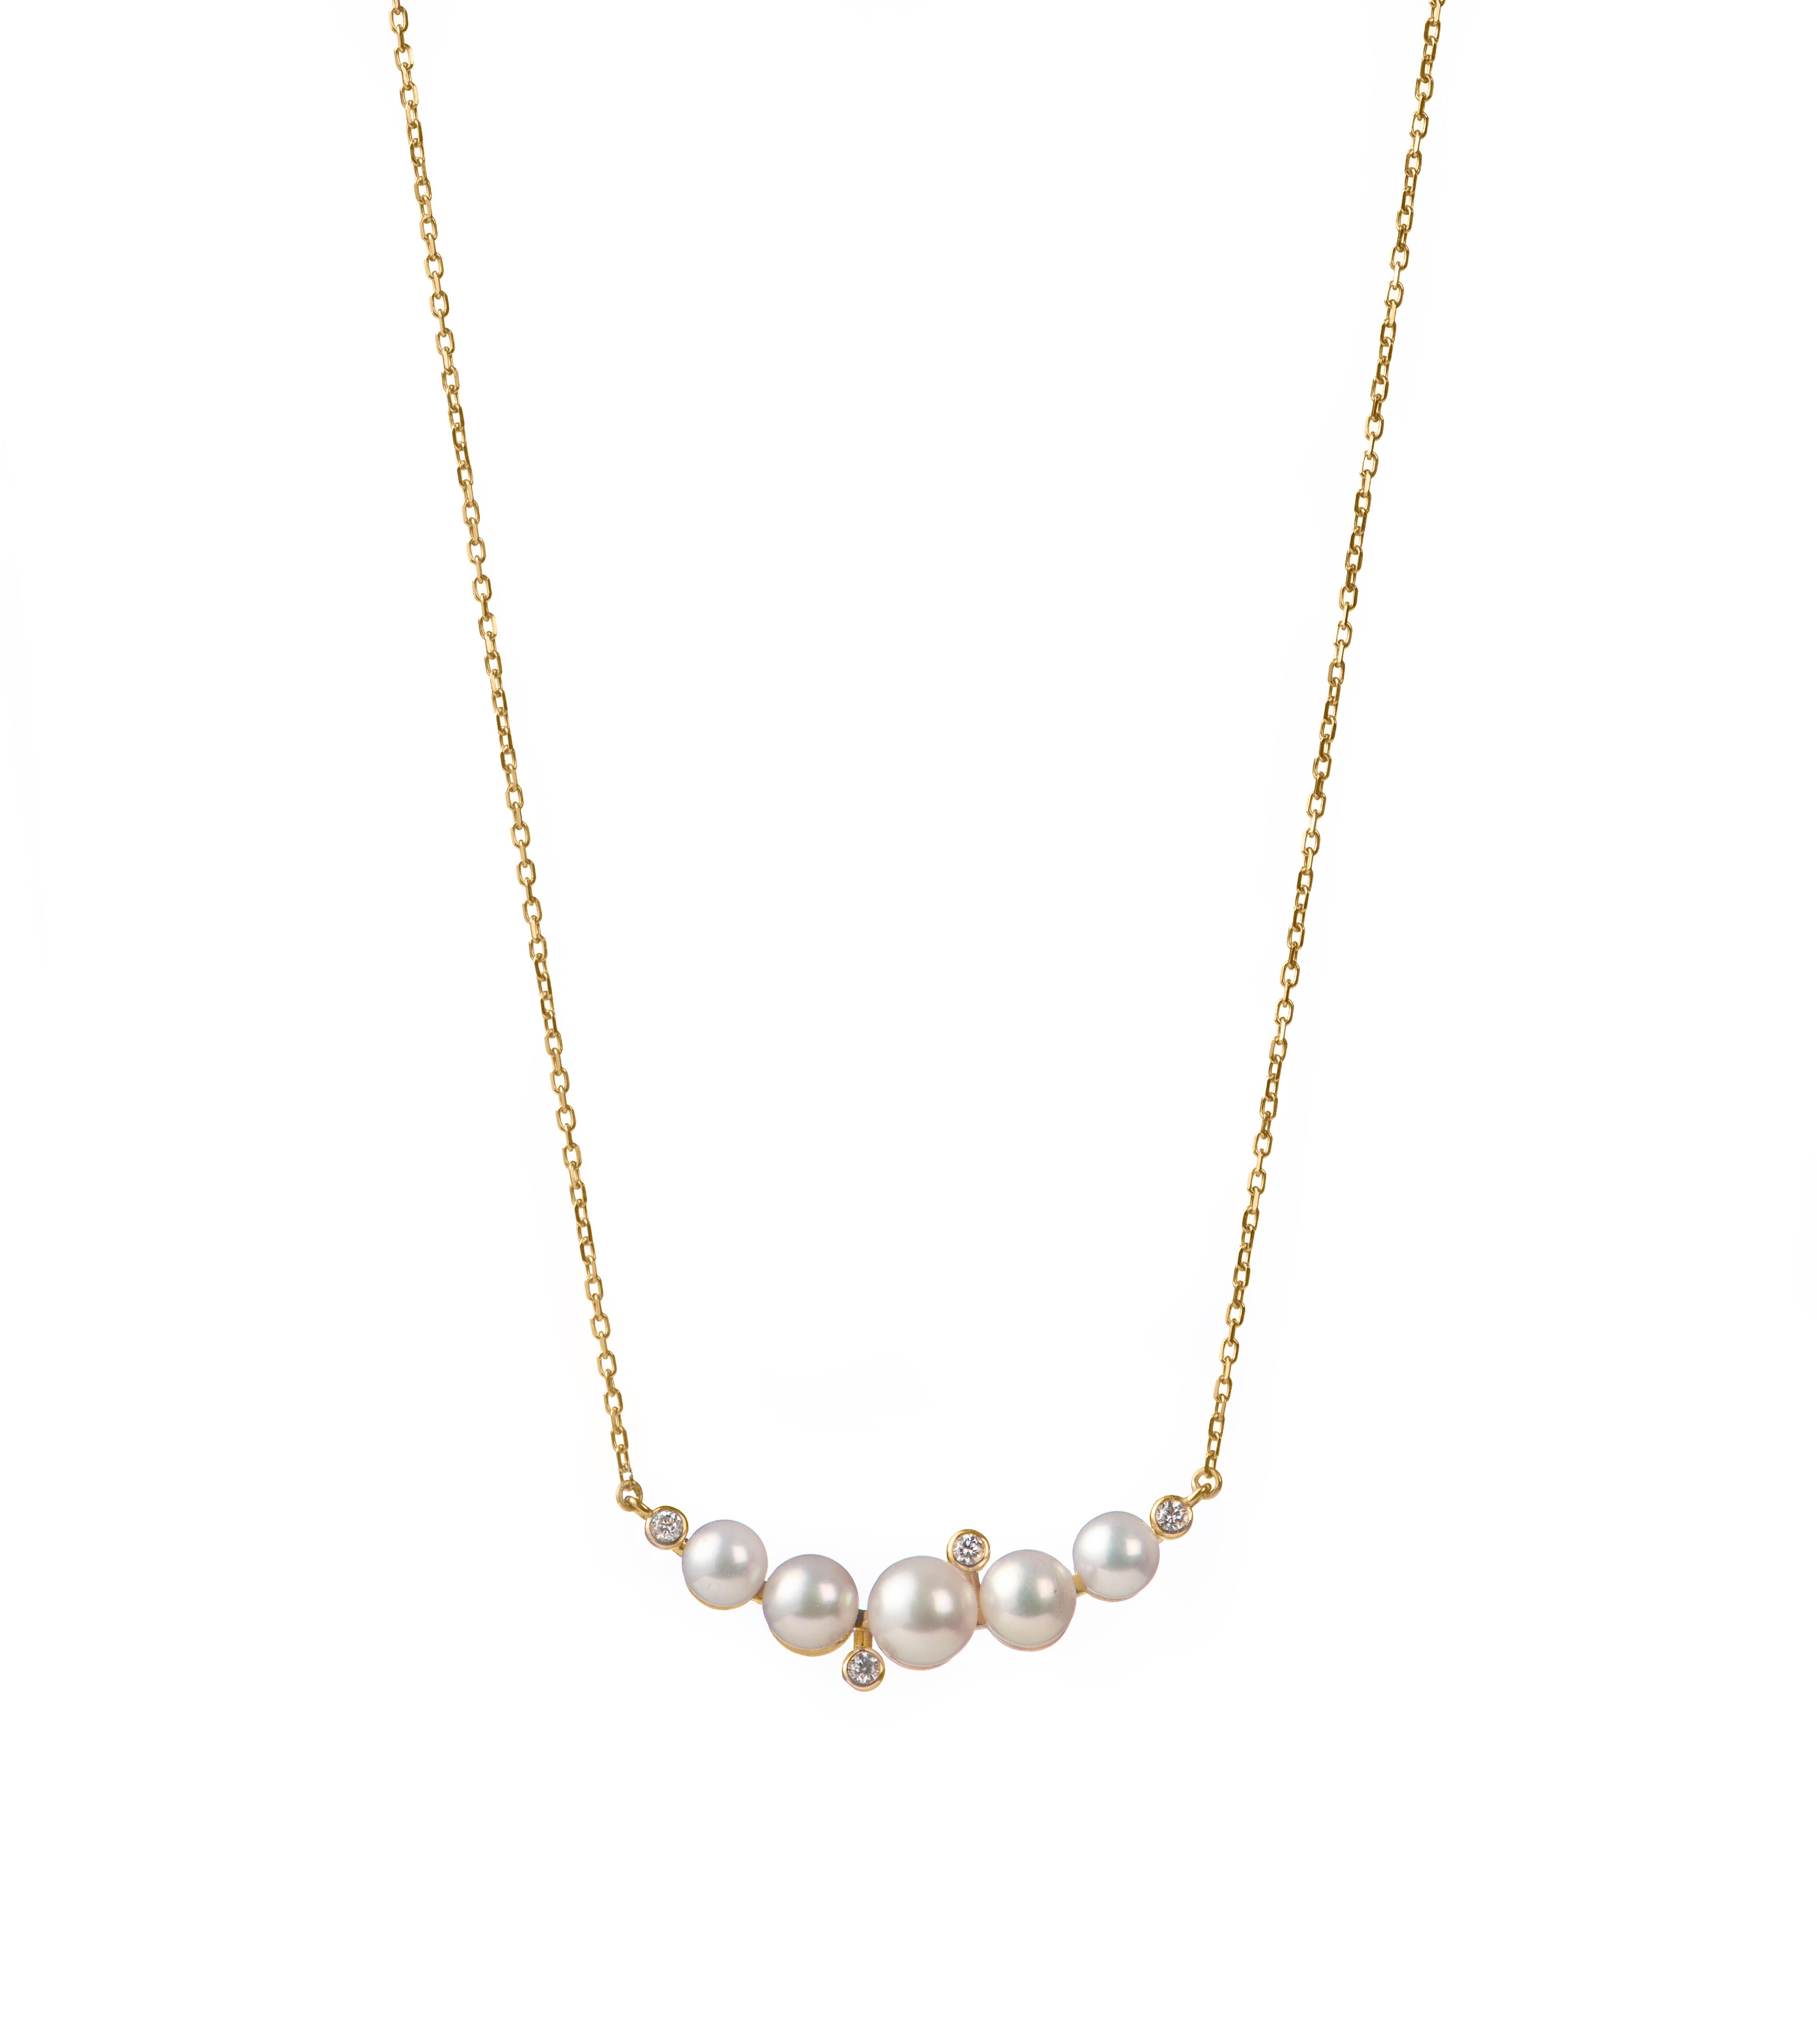 Drawing inspiration from the rising foam in the sea, this necklace features a soft curve of freshwater pearls and is illuminated by glimmering natural diamonds, set on an 18 Karat Gold chain.
18 Karat Yellow Gold
Natural Diamonds, with total carat